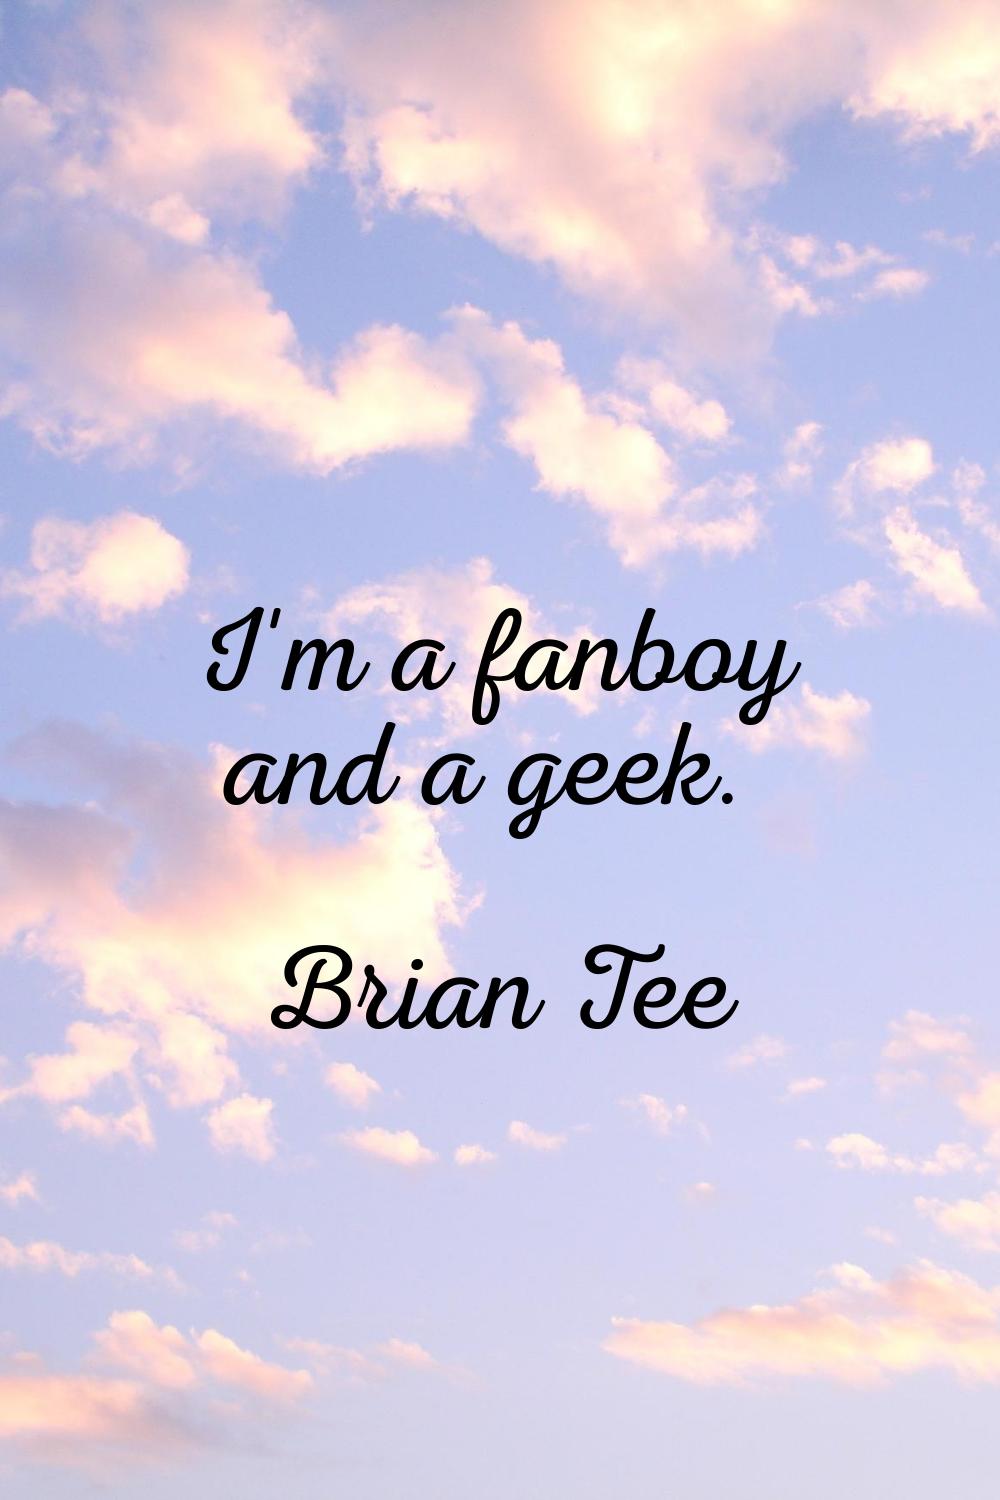 I'm a fanboy and a geek.